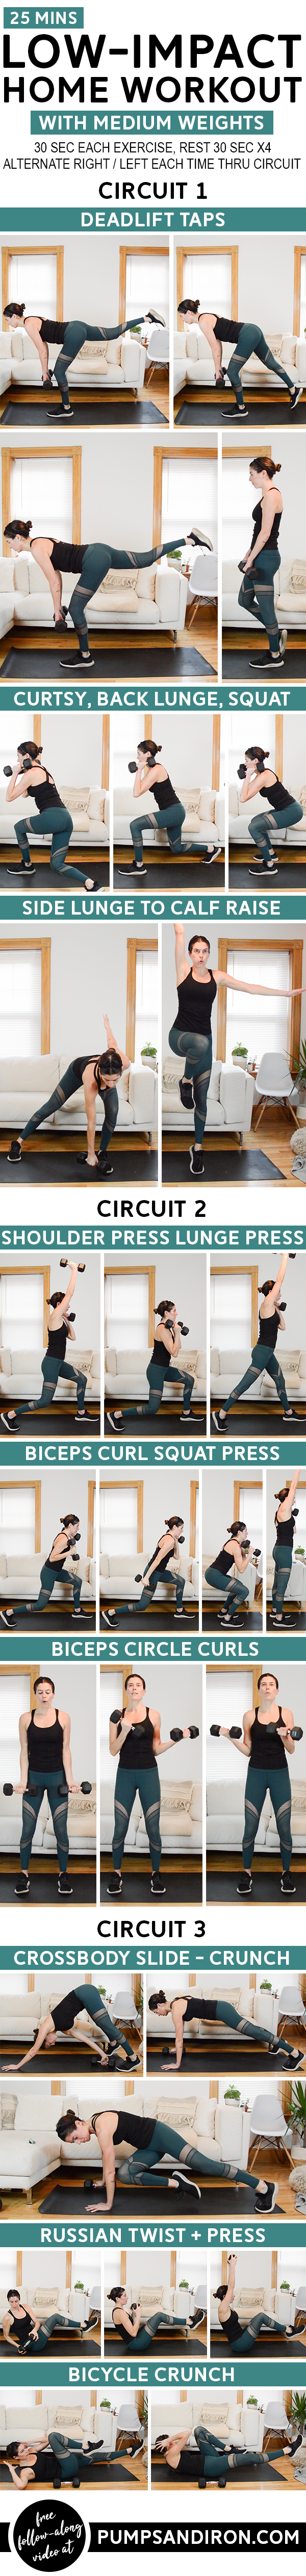 Home Workout with Weights - Total Body, Quiet - This total body low-impact workout is broken up into three circuits. All you'll need is a set of medium weights. Video included! #homeworkout #workoutvideo #lowimpactworkout #dumbbells #quietworkout